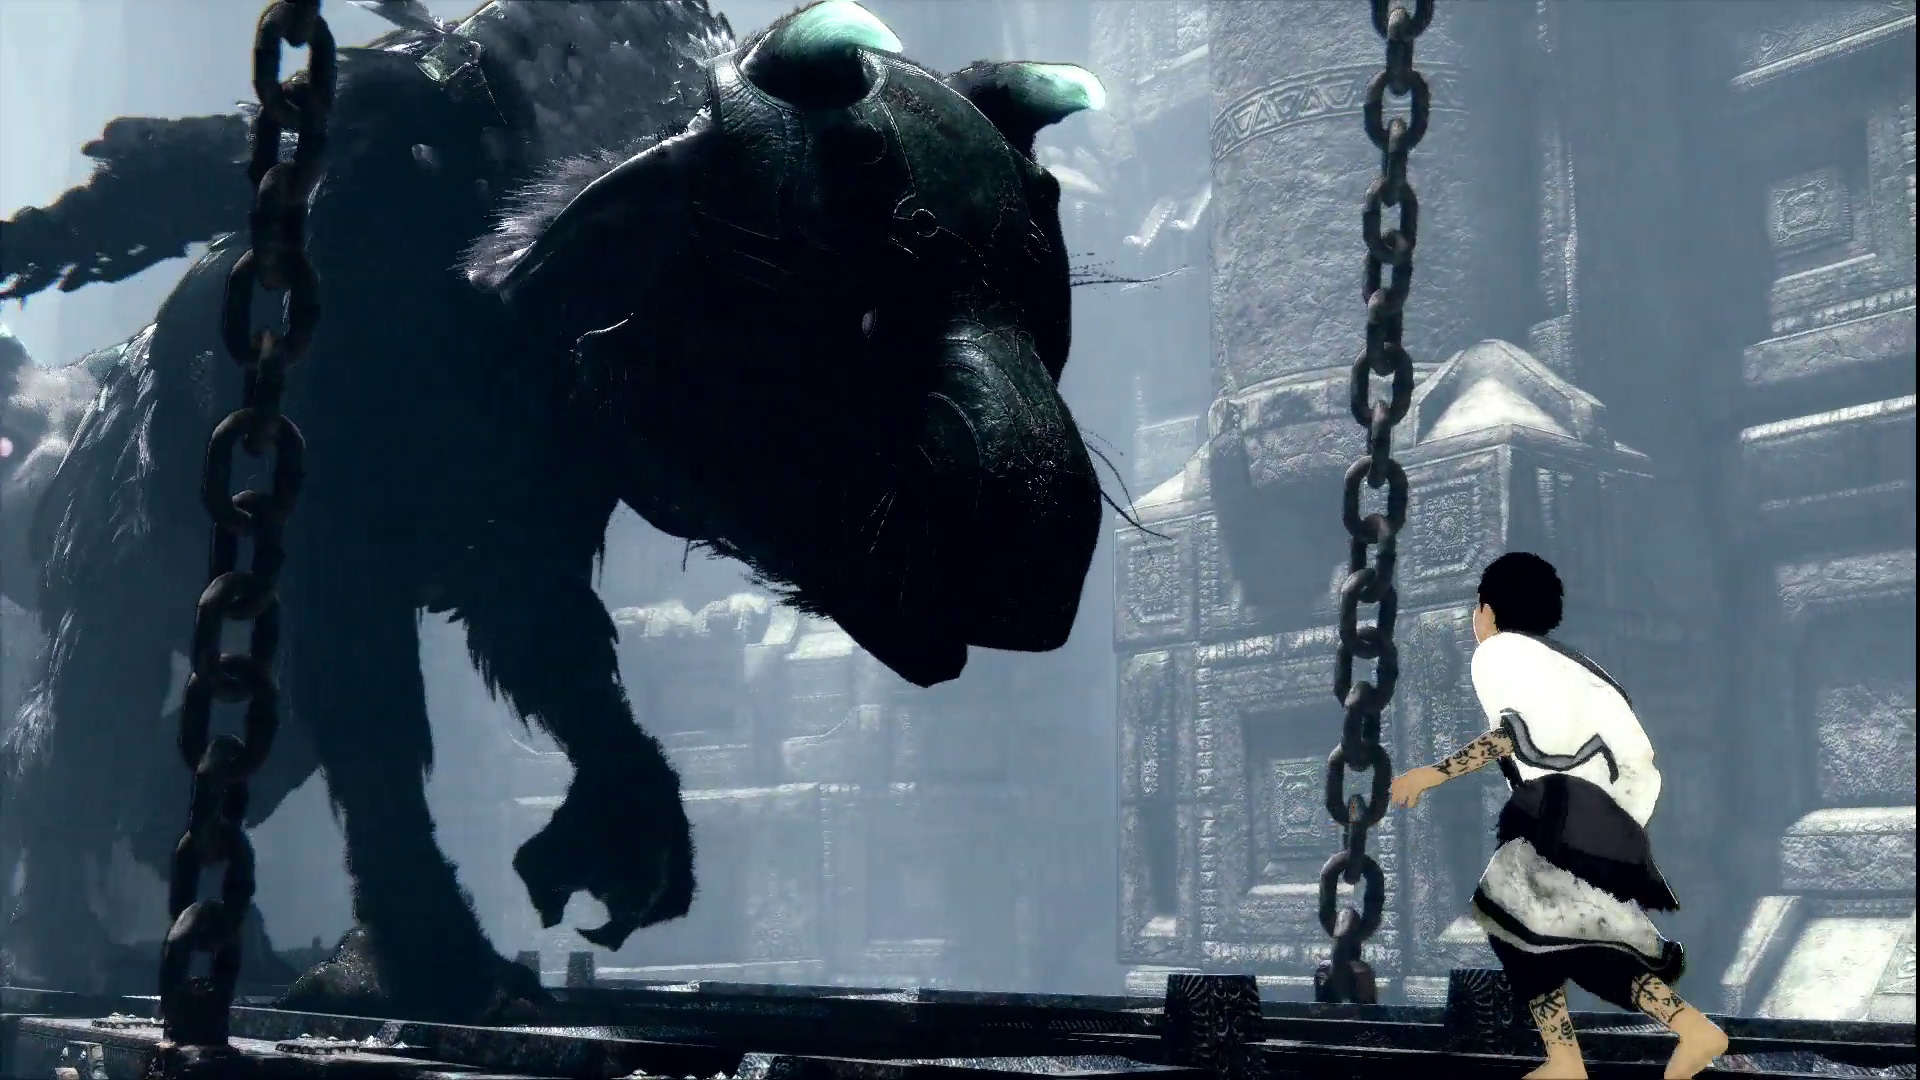 Just Finished 'THE LAST GUARDIAN' on the PS4 - My thoughts. — Steemit